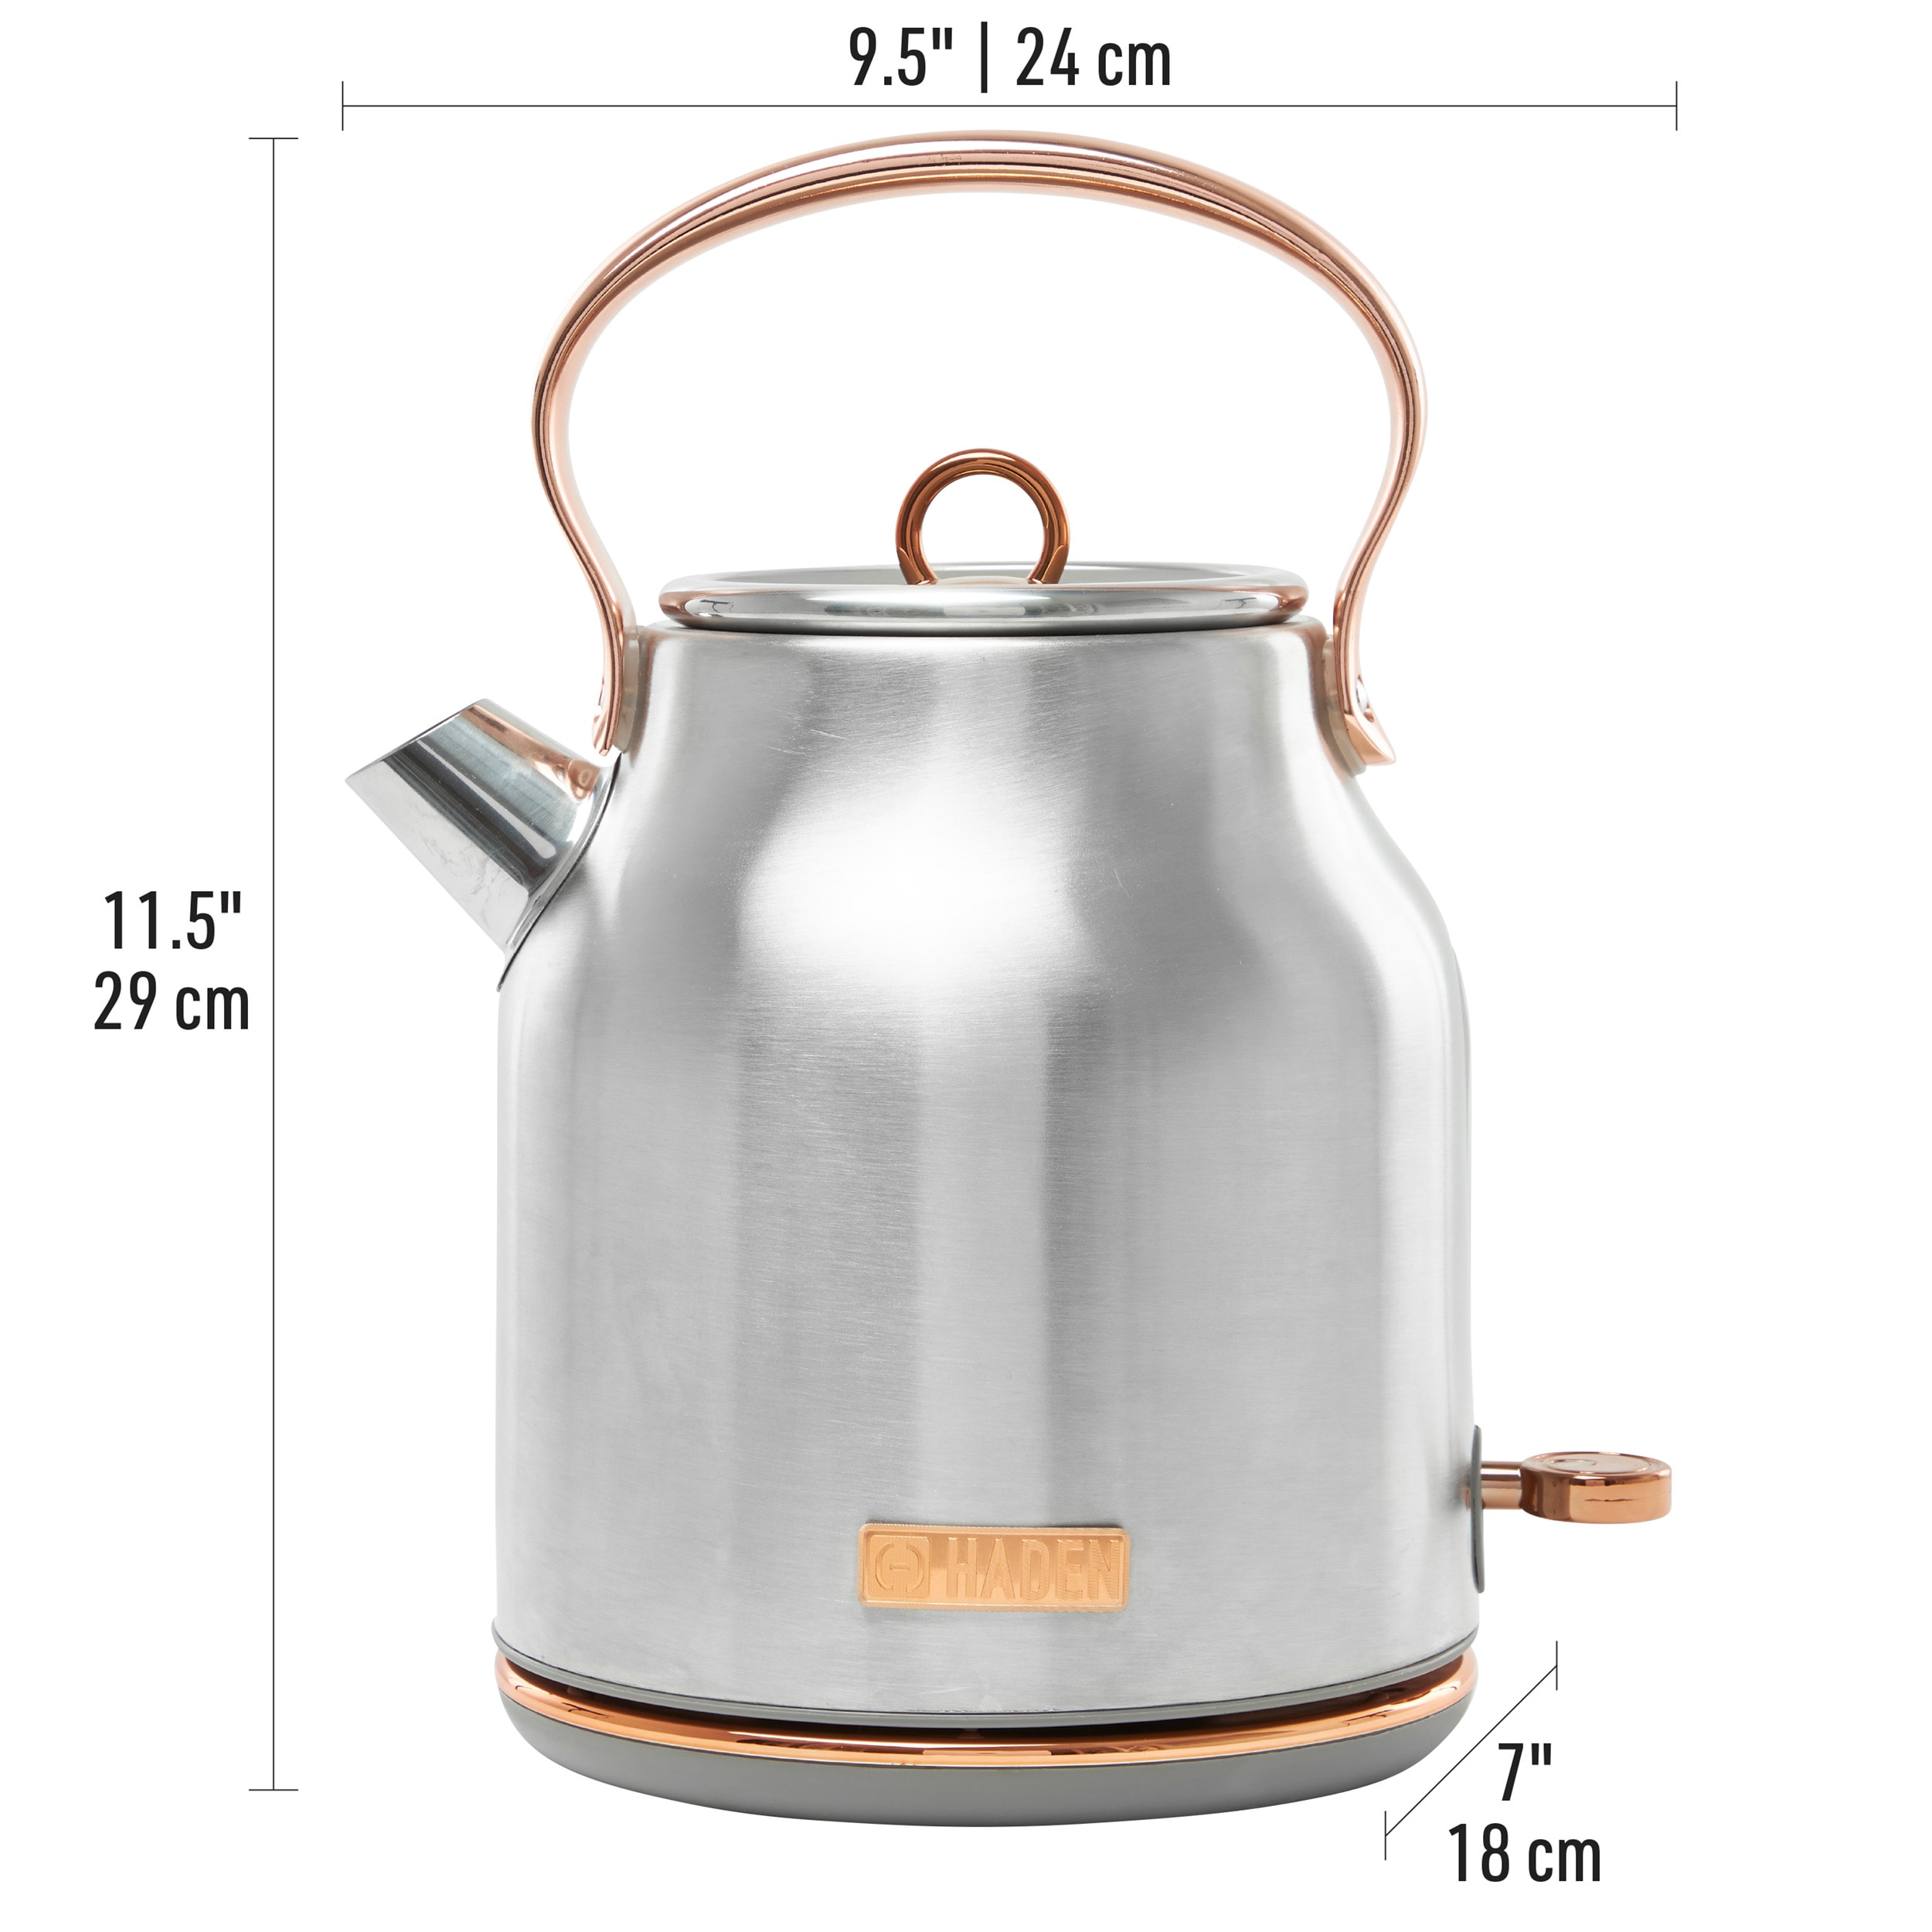 Electric Kettle, Miroco 1.5L Double Wall 100% Stainless Steel BPA-Free Cool  Touch Tea Kettle Black - Coupon Codes, Promo Codes, Daily Deals, Save Money  Today